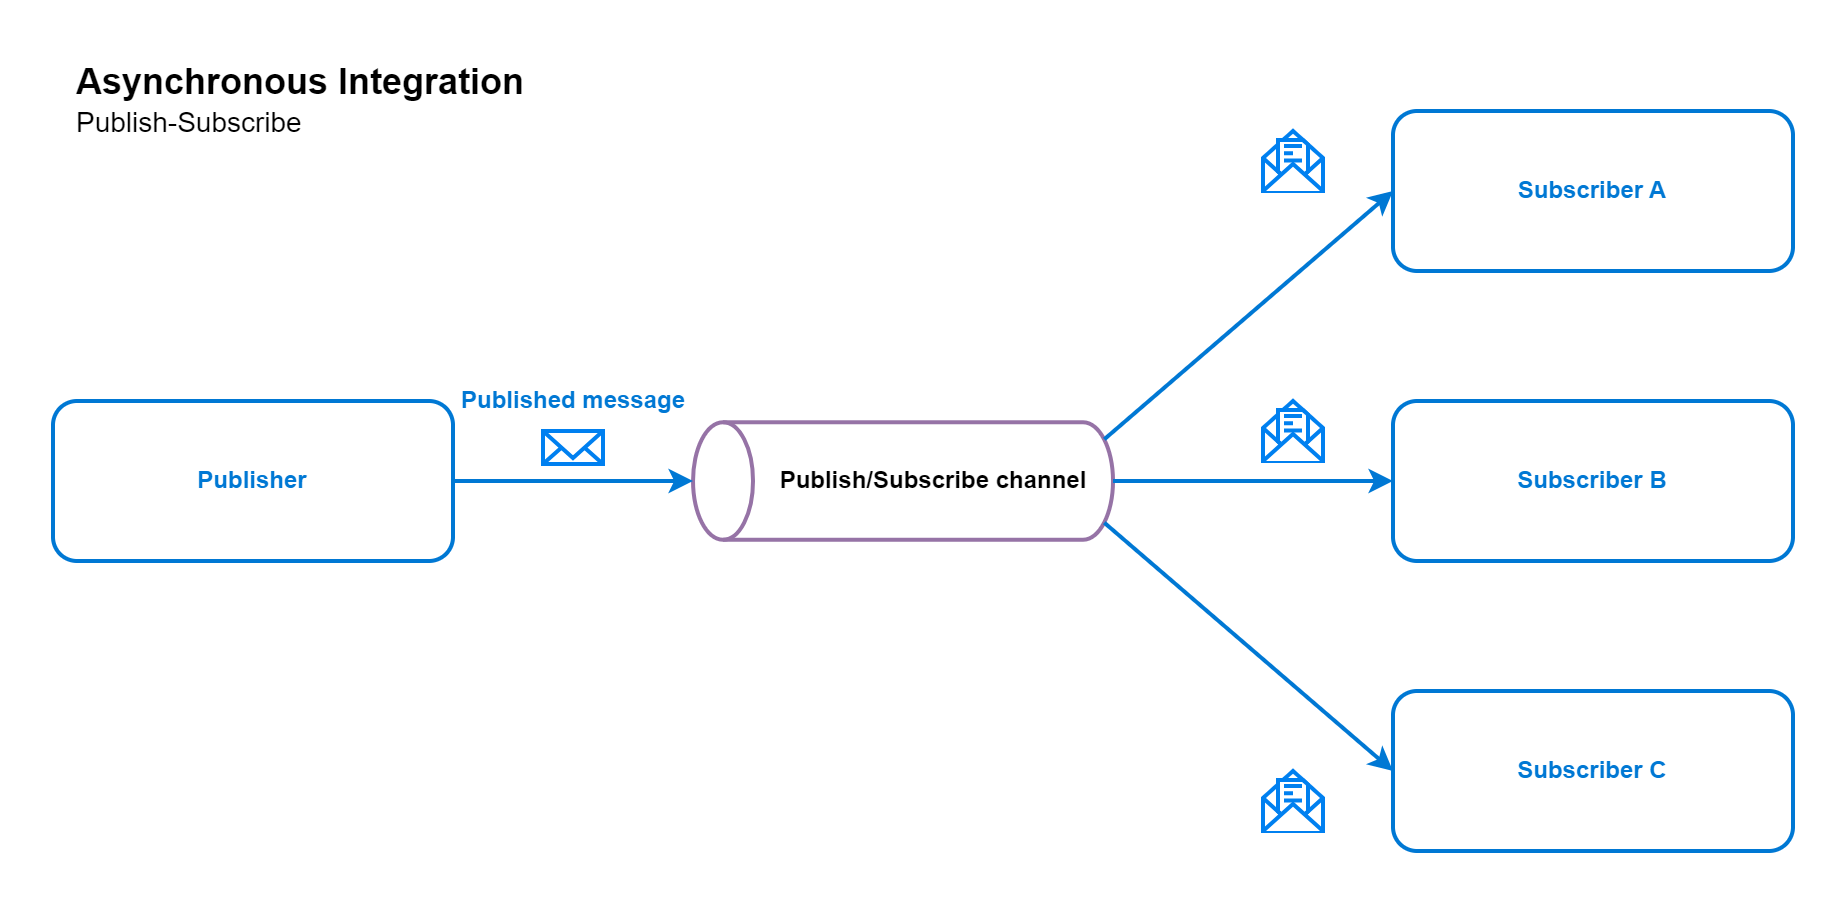 A diagram showing the async integration pattern using publish subscriber.